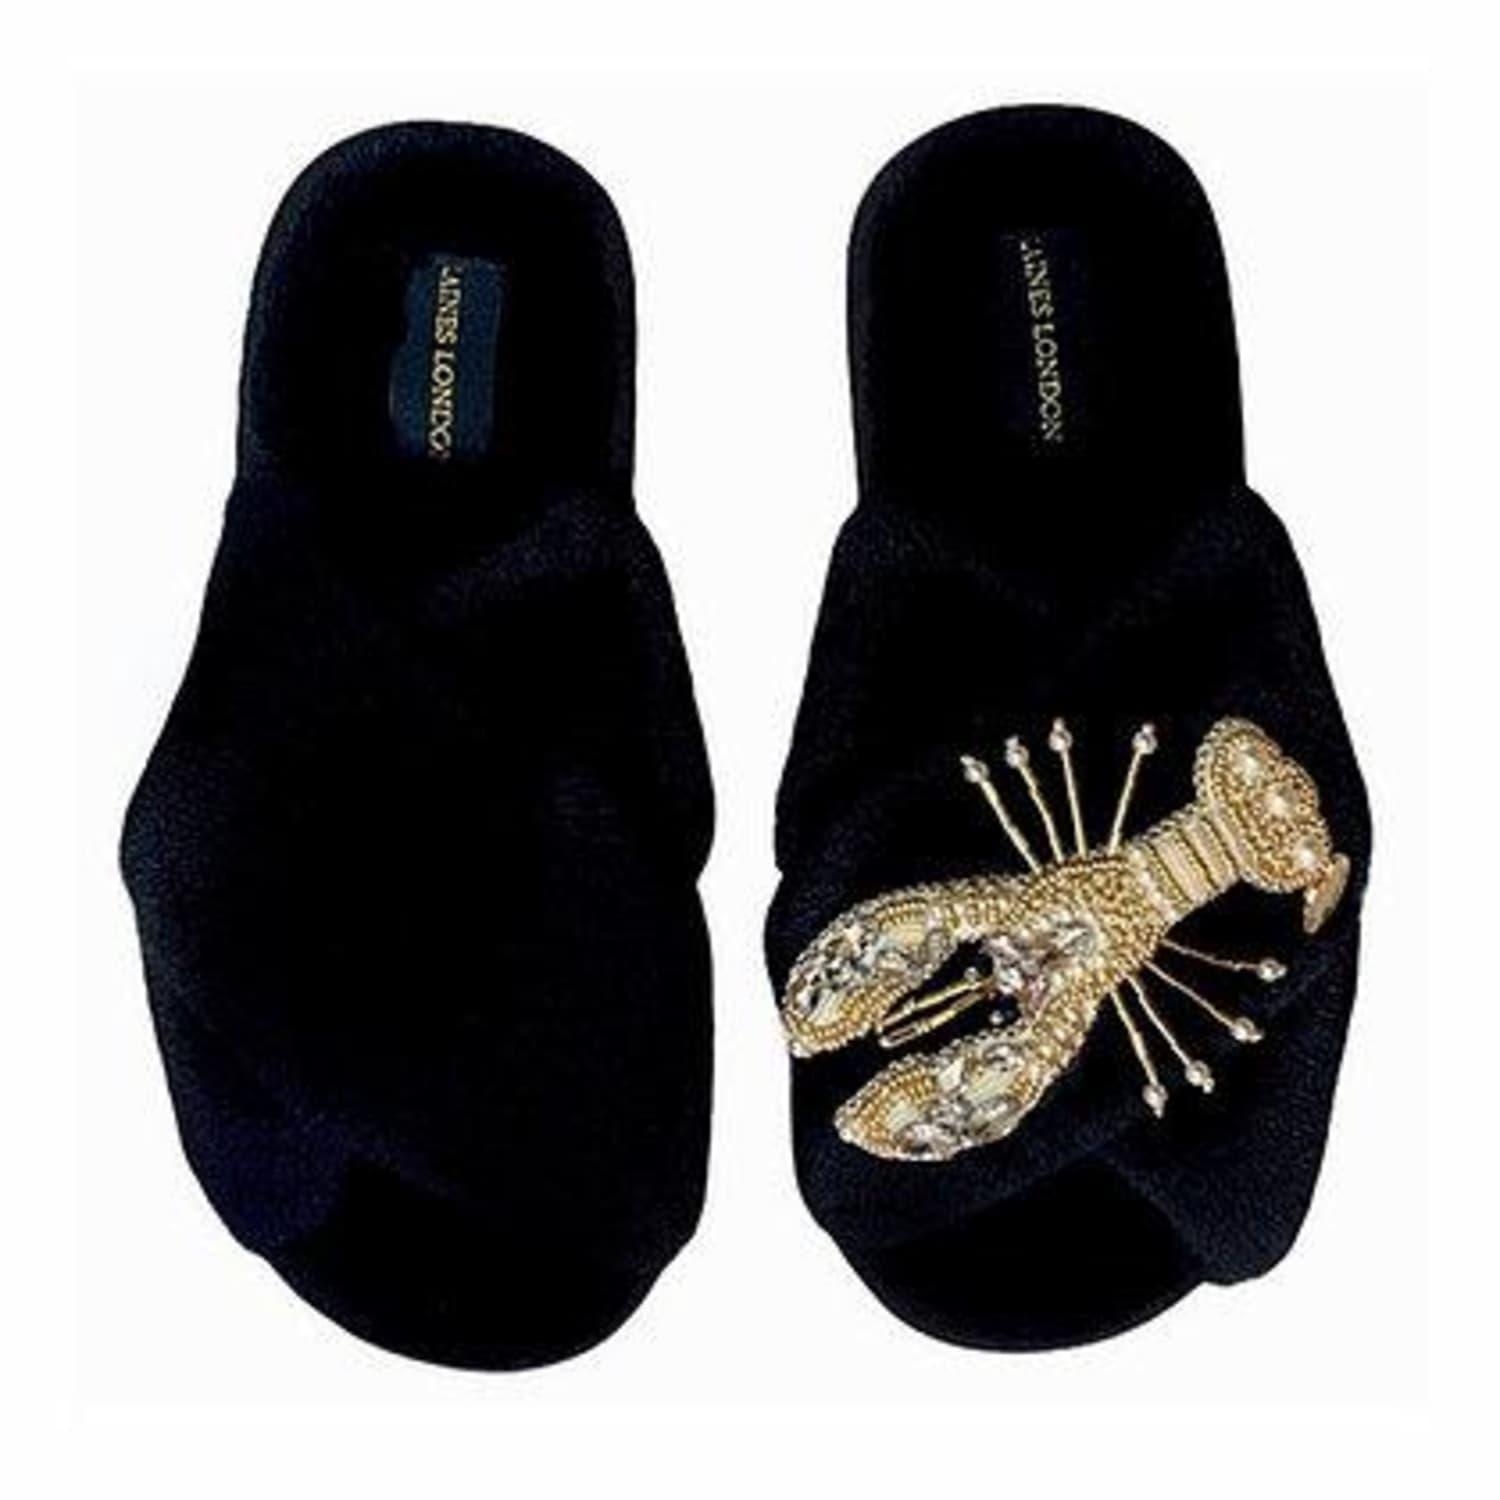 Laines London London Fluffy Slippers With Gold And Pearl Lobster Brooch ...